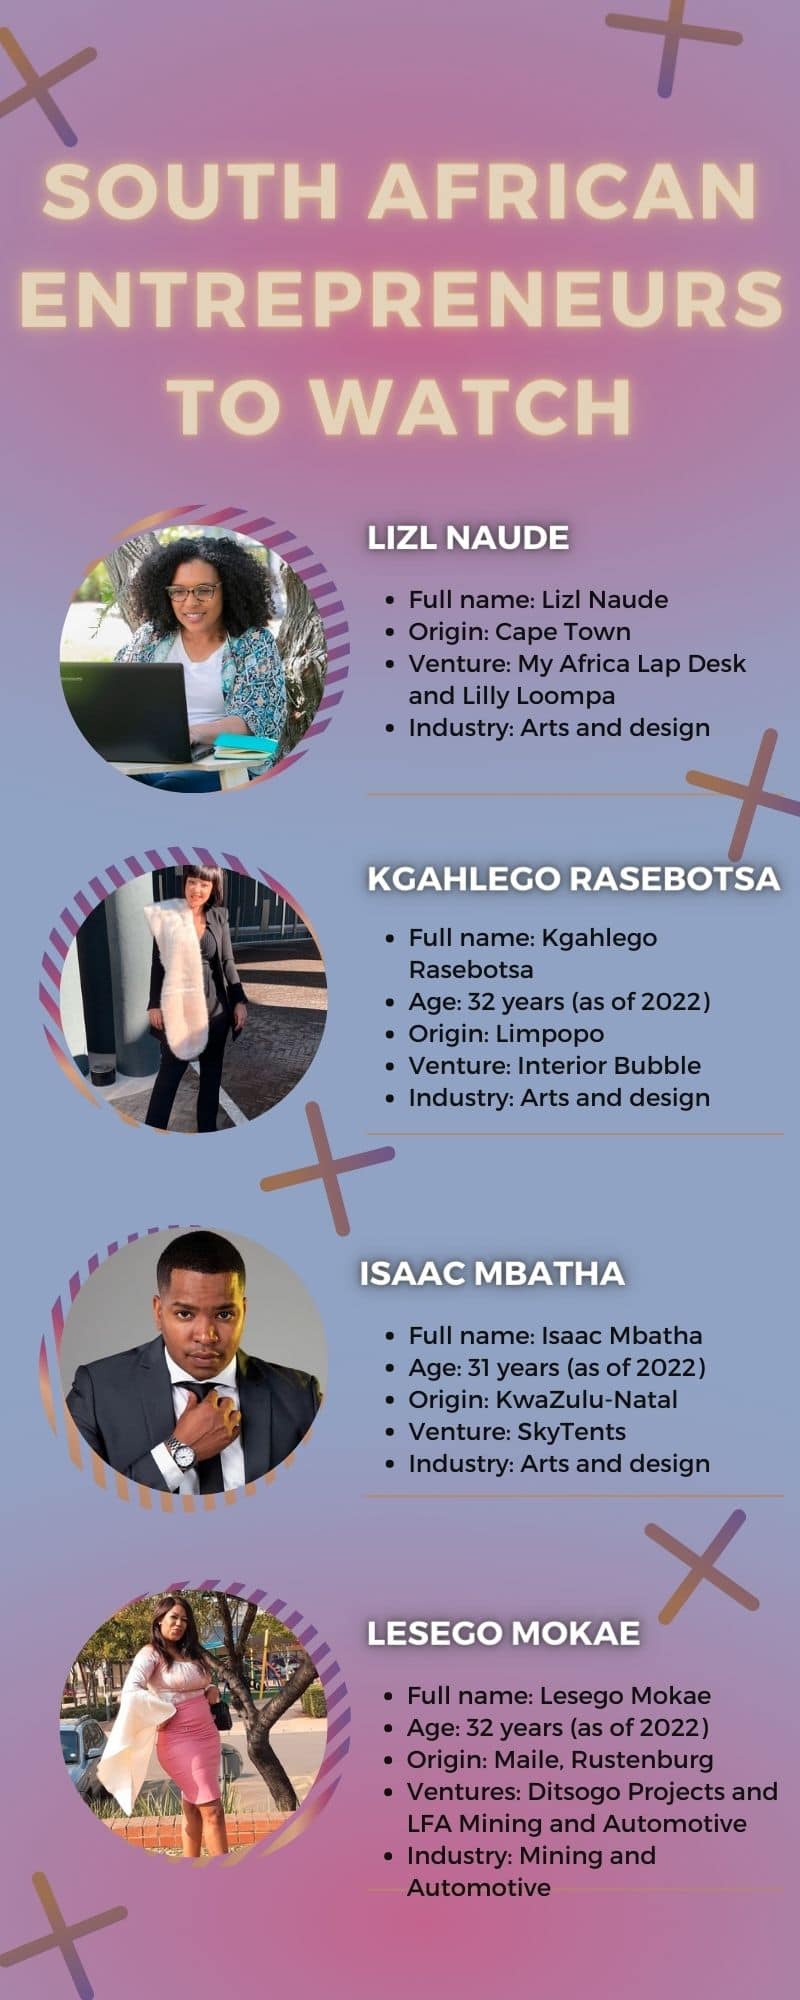 South African entrepreneurs to watch